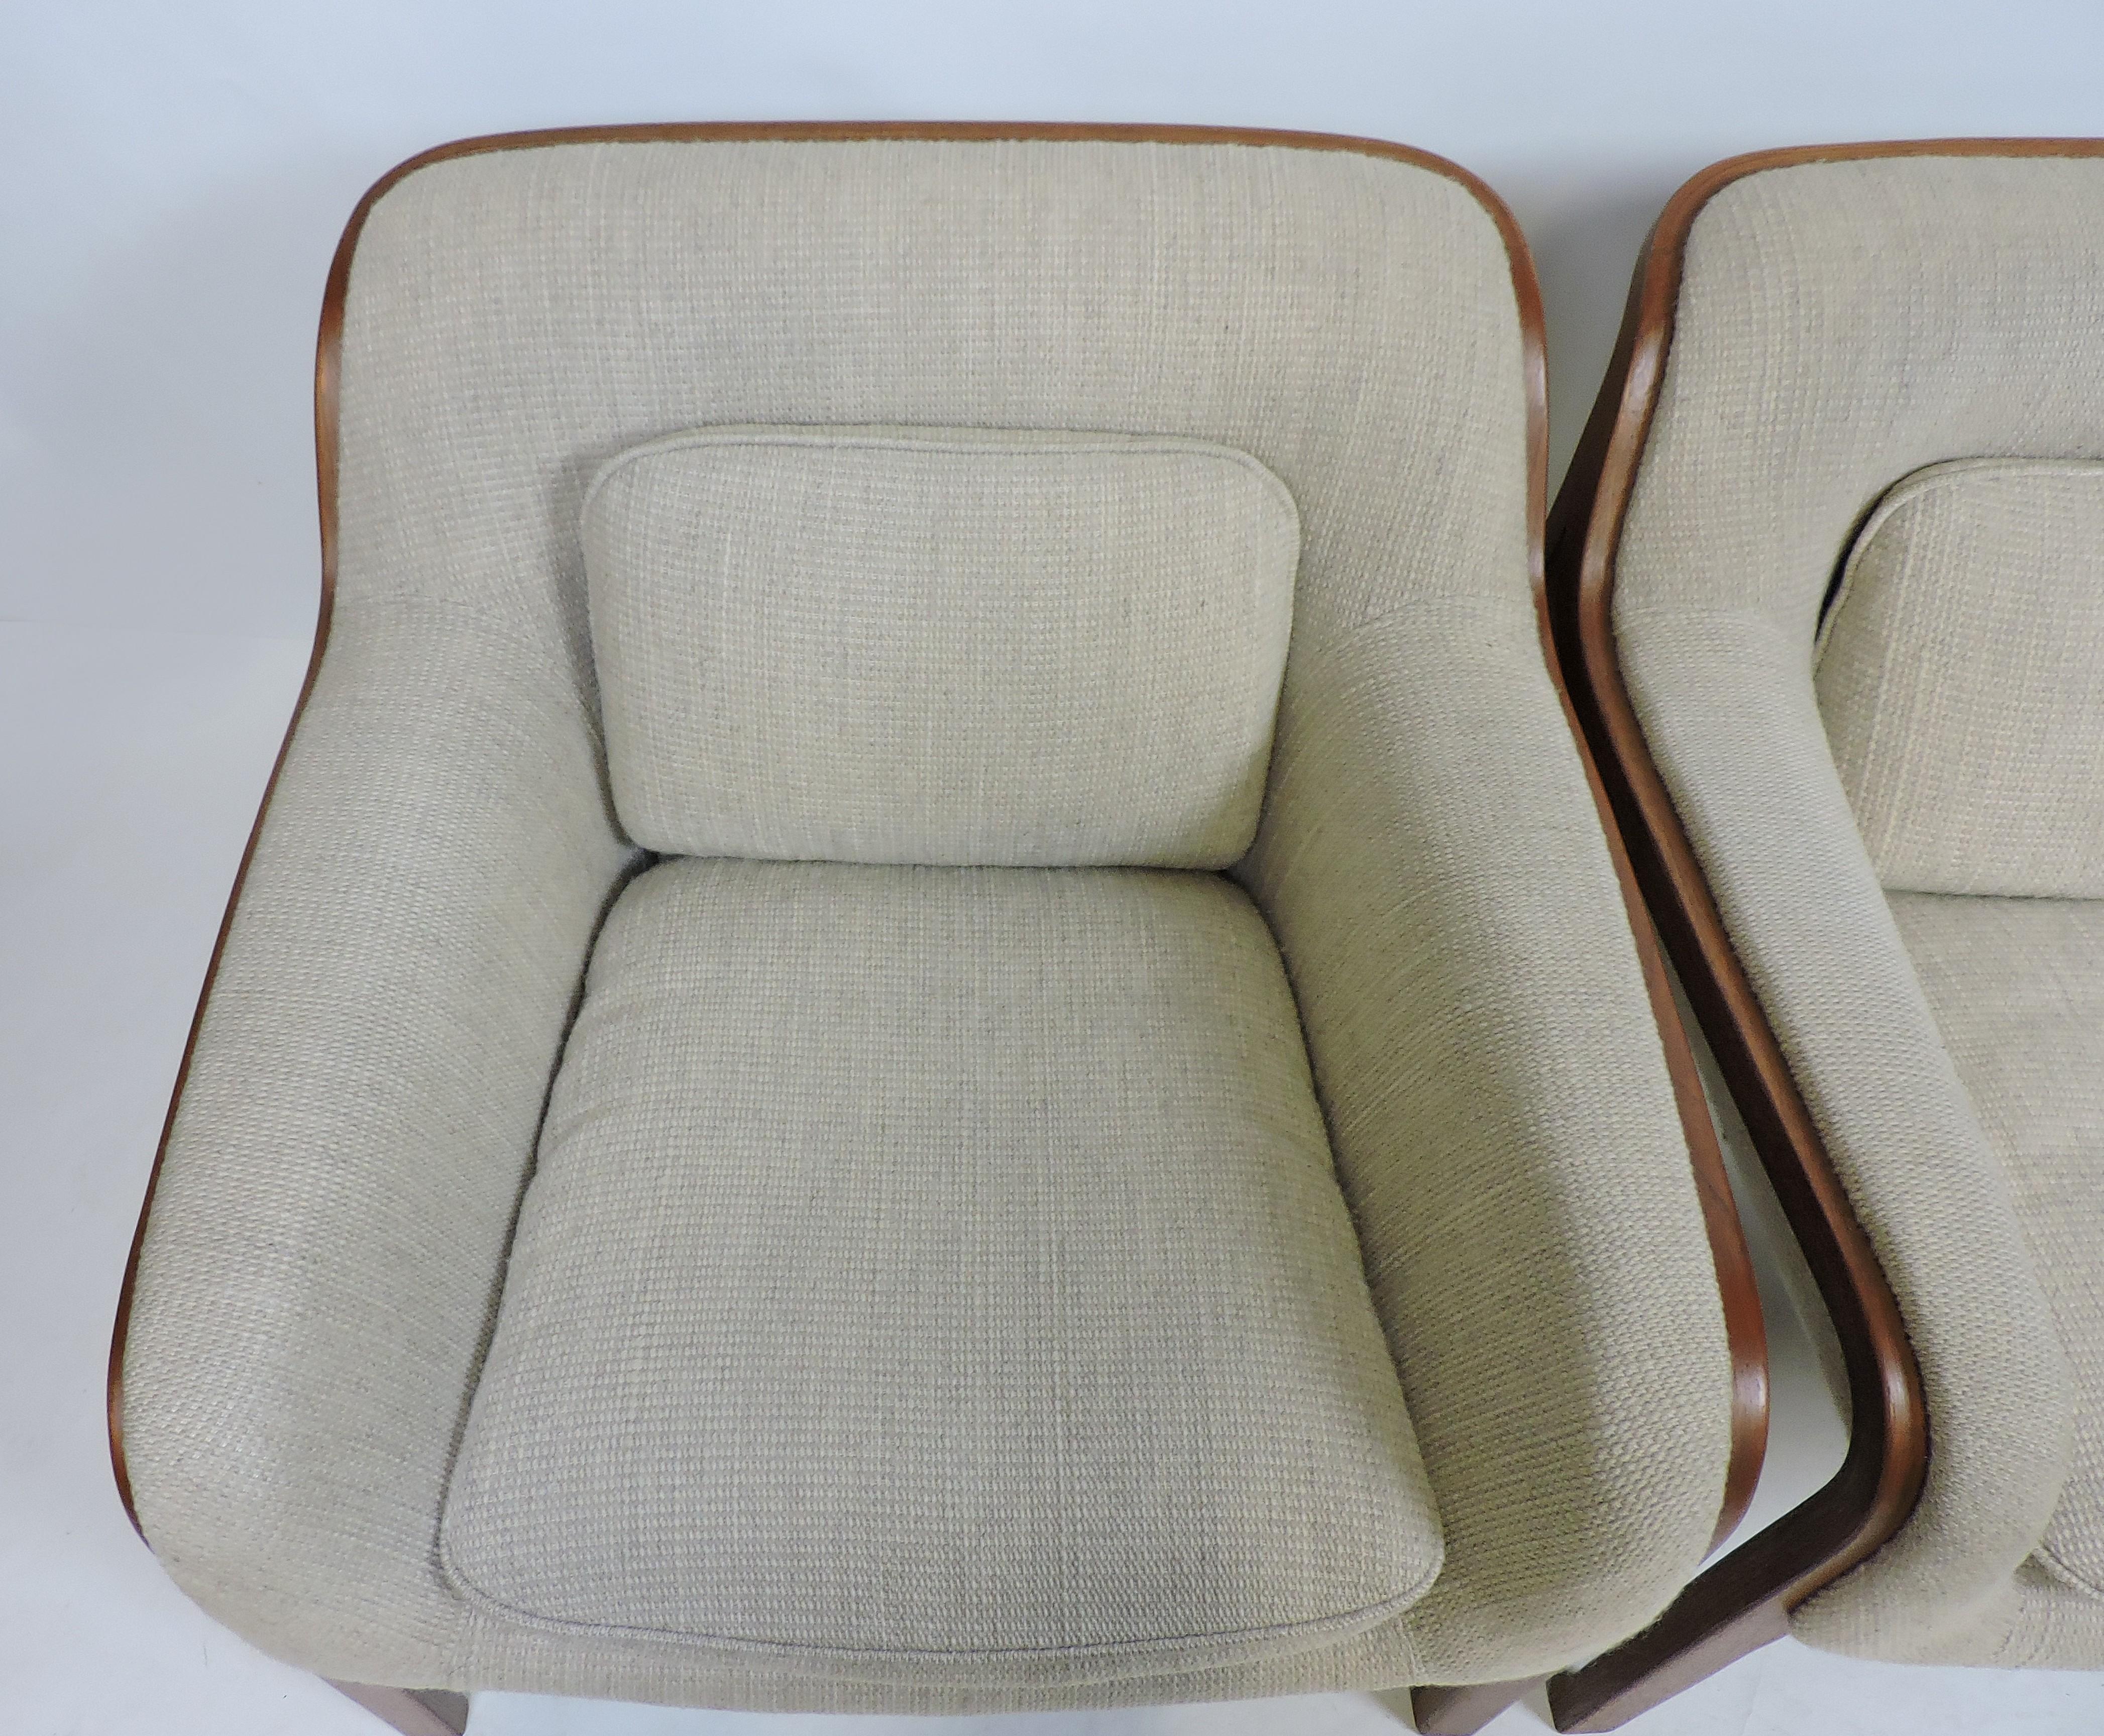 Late 20th Century Pair of Bill Stephens Mid-Century Modern Bentwood Lounge Chairs for Knoll